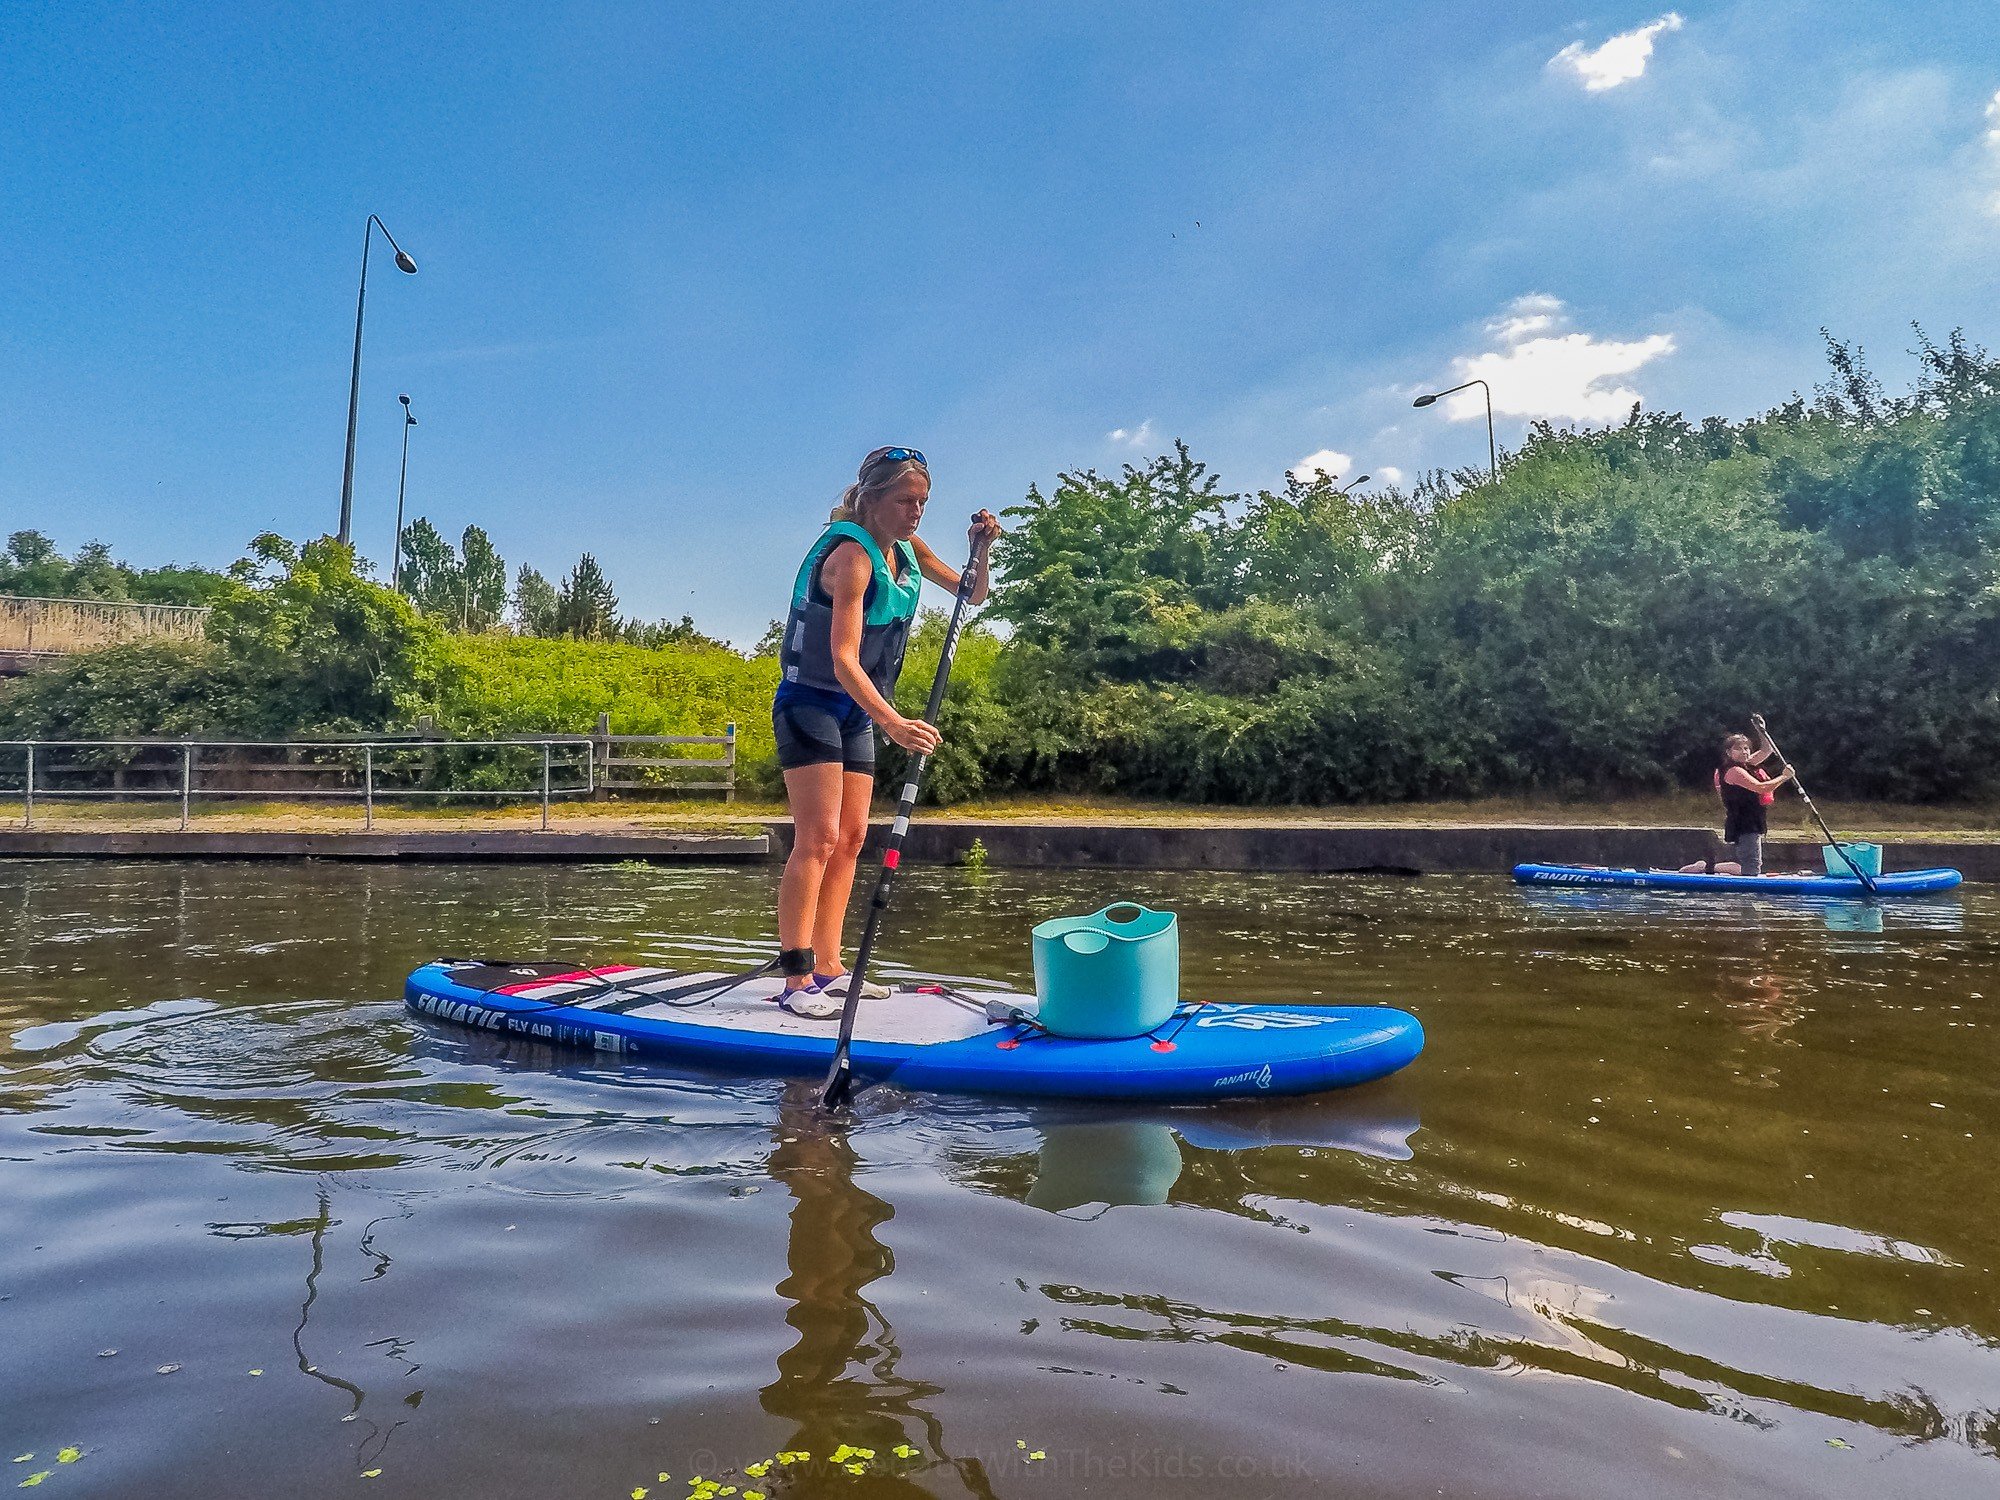 Collecting rubbish using a stand-up paddleboard